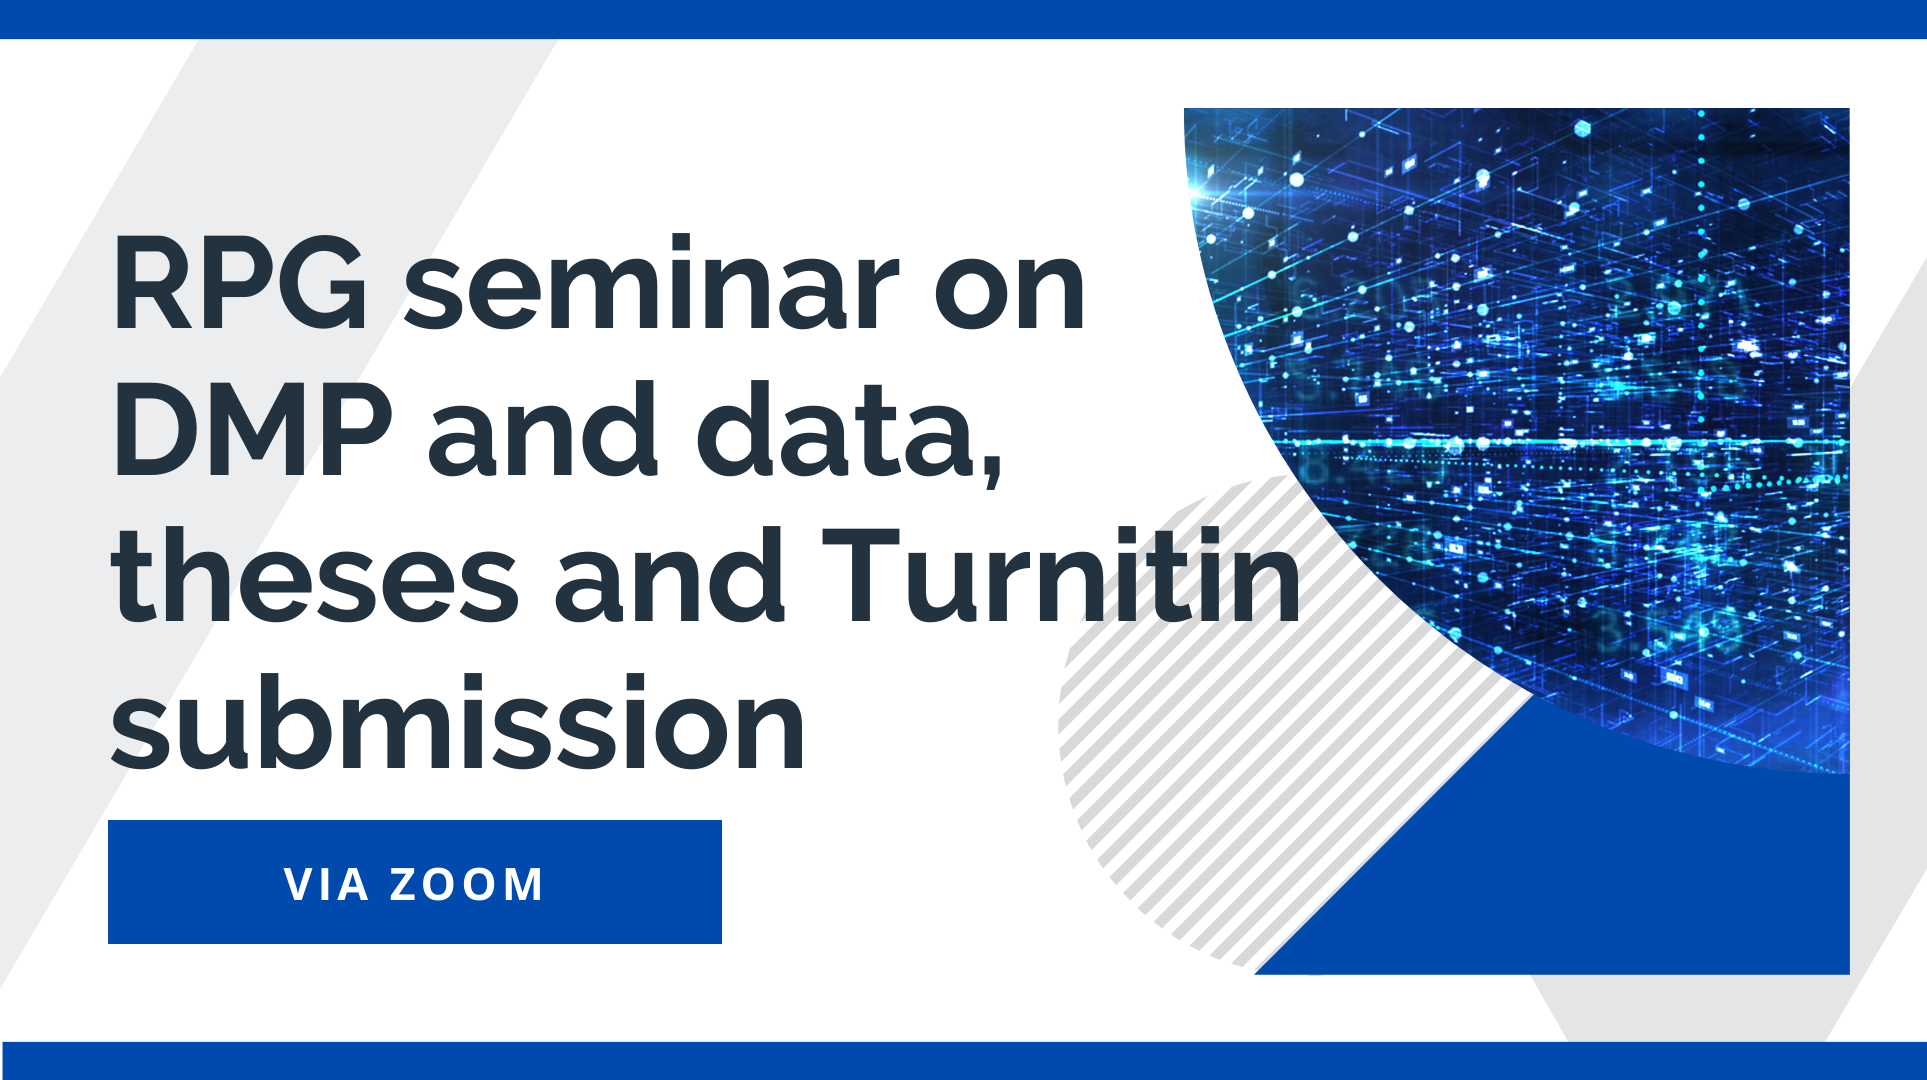 RPG seminar on DMP and data, theses and Turnitin submission (via Zoom)